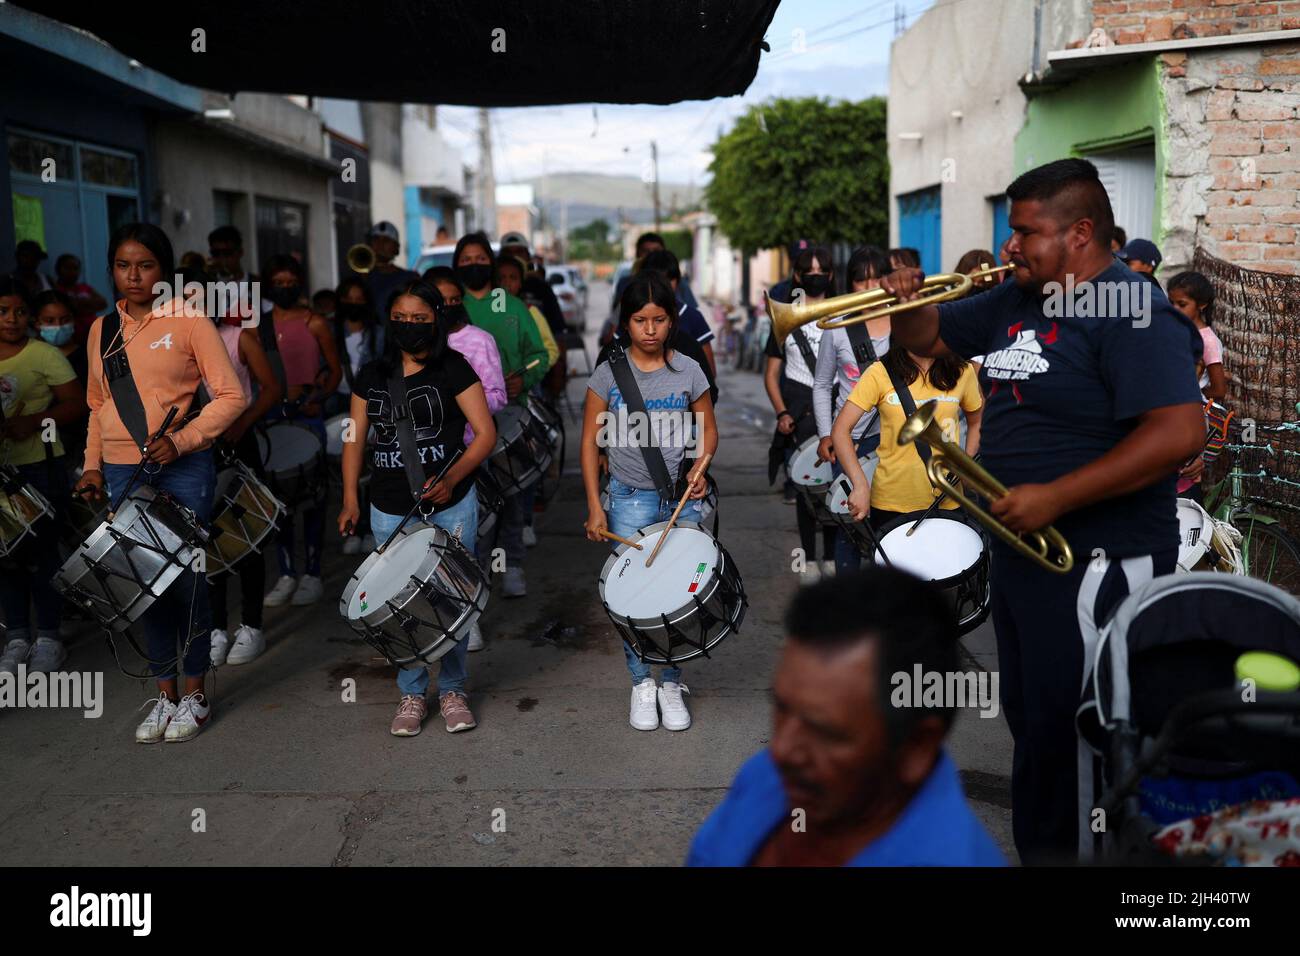 A music band plays music during the wake of late migrant Jose Lopez, 34, after being repatriated from San Antonio, Texas, U.S., at his family's home in Celaya, in Guanajuato state, Mexico July 14, 2022. REUTERS/Edgard Garrido Stock Photo